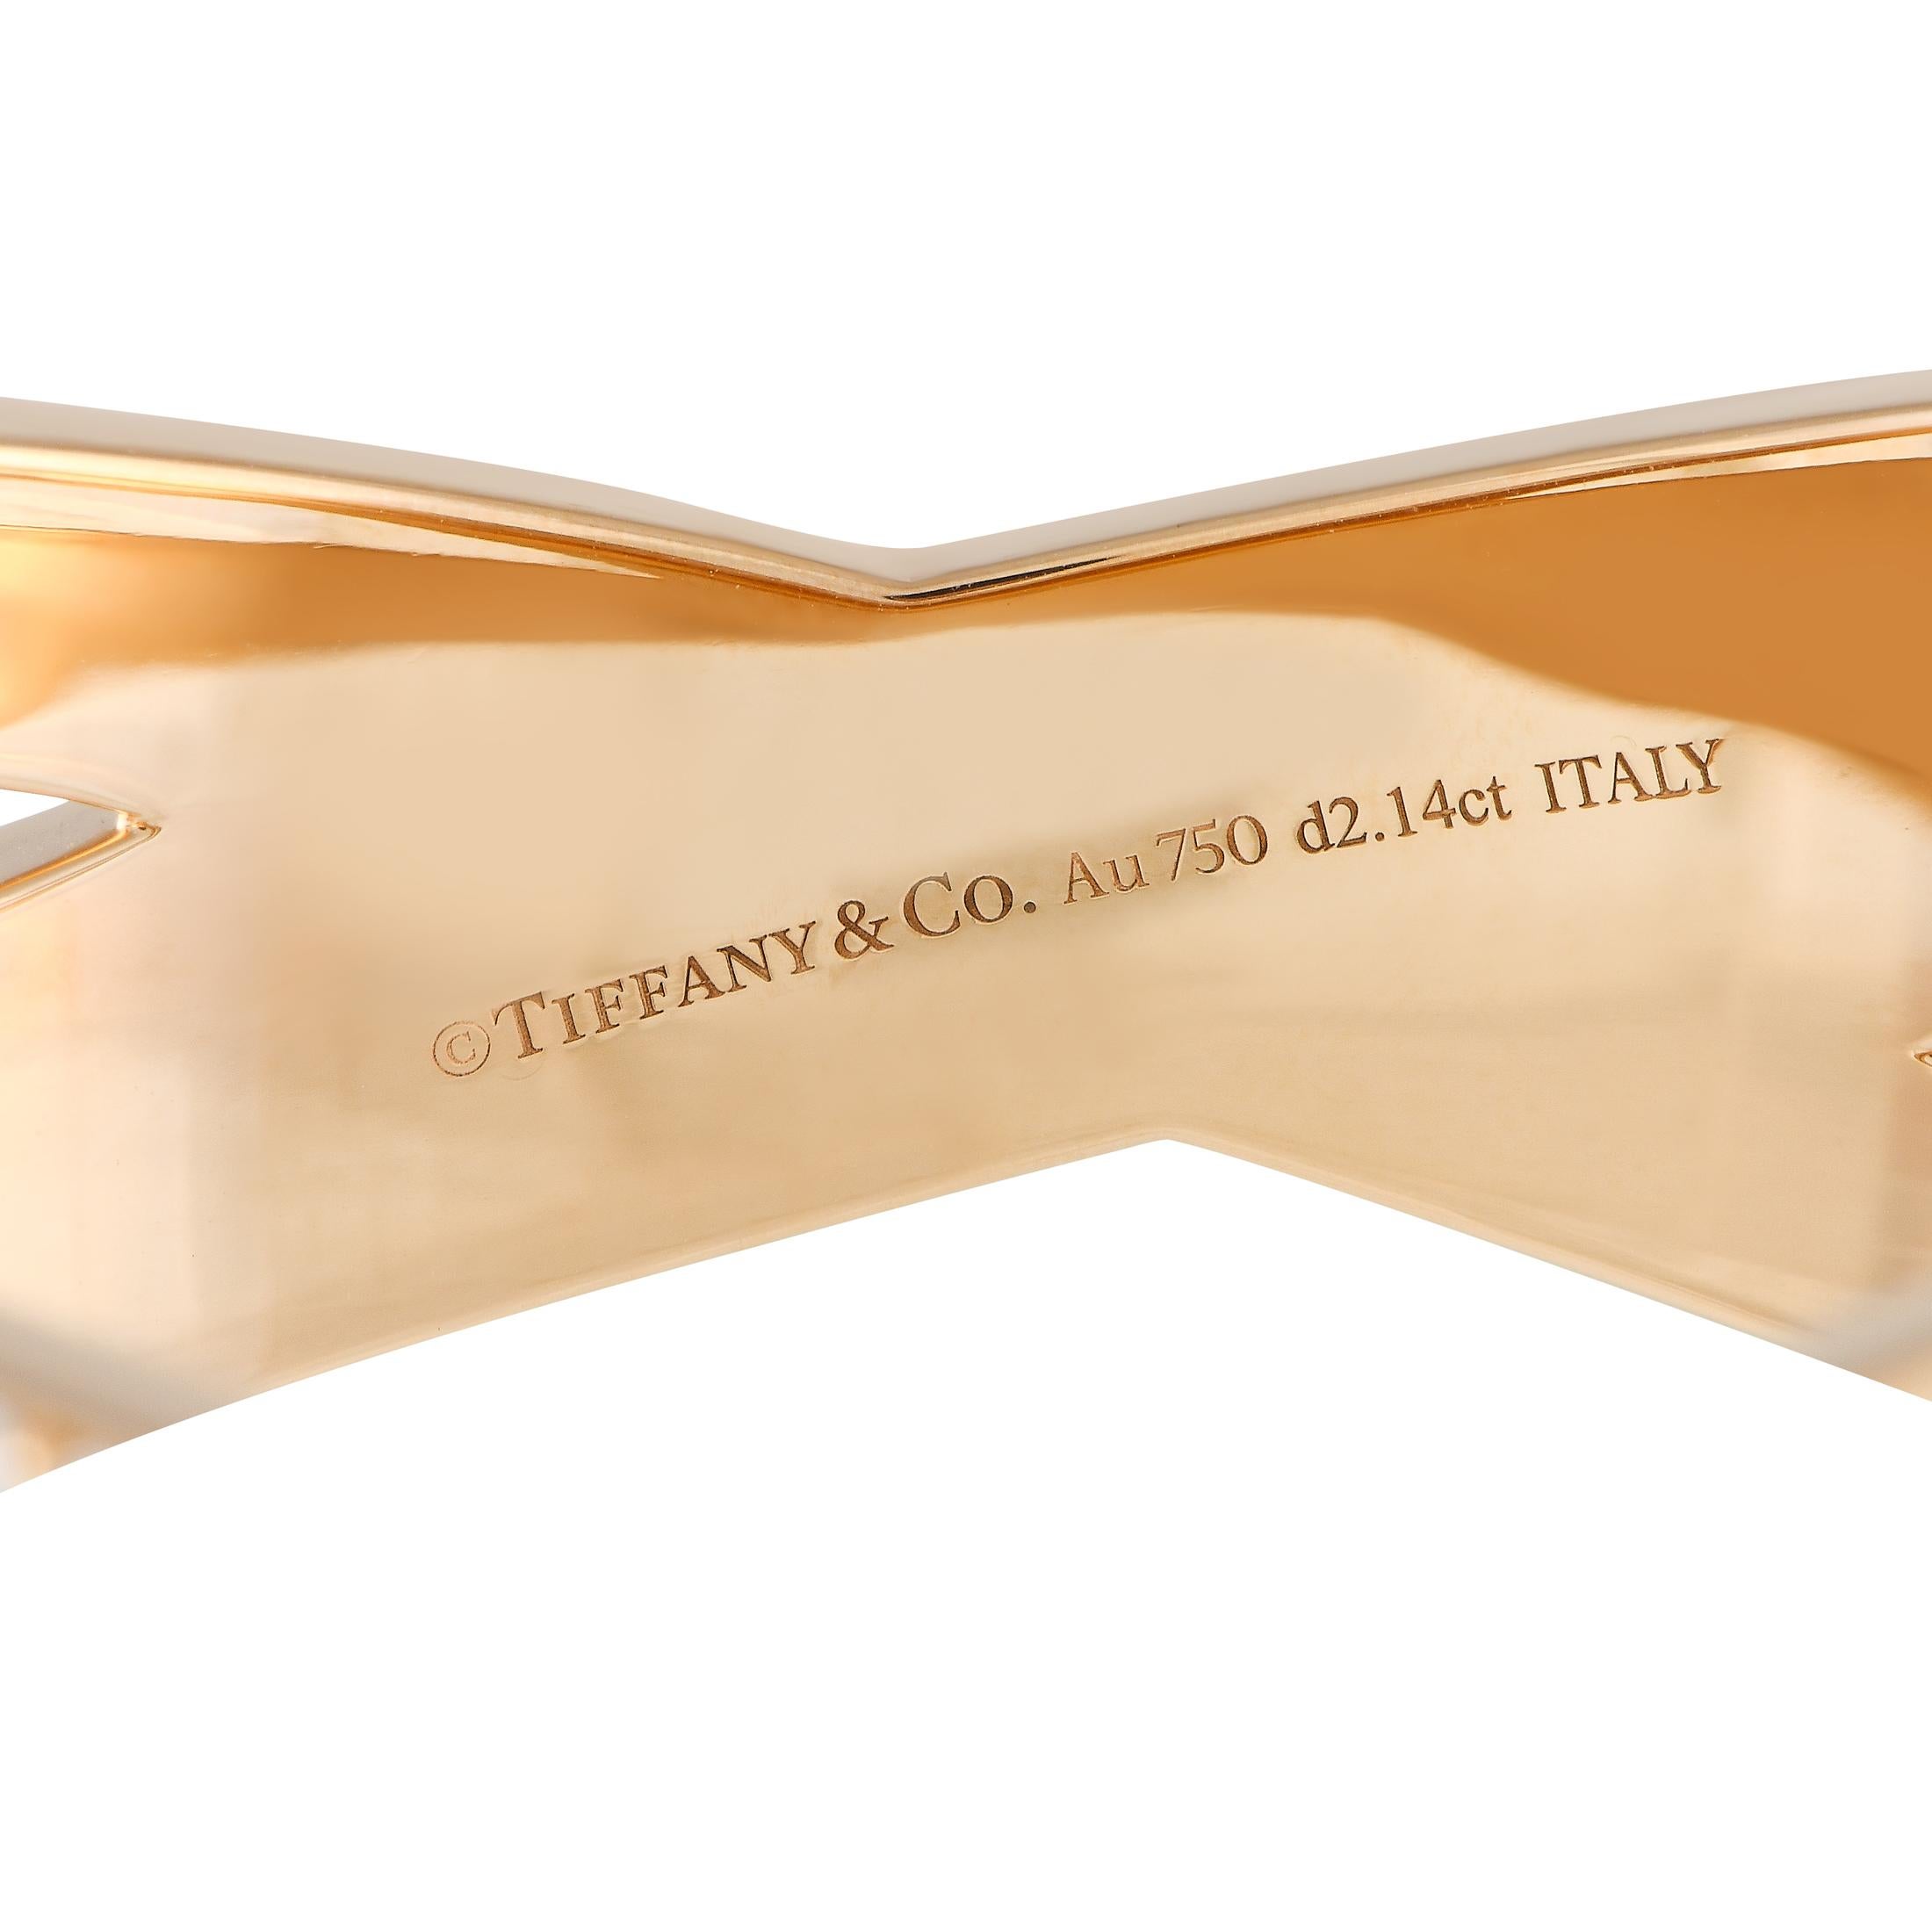 With a bold and beautiful X design, this Tiffany & Co. Atlas X Wide Bangle showcases edgy elegance at its best. It is crafted in 18K rose gold and decorated with round brilliant diamonds. The refined simplicity of this bangle allows easy stacking,